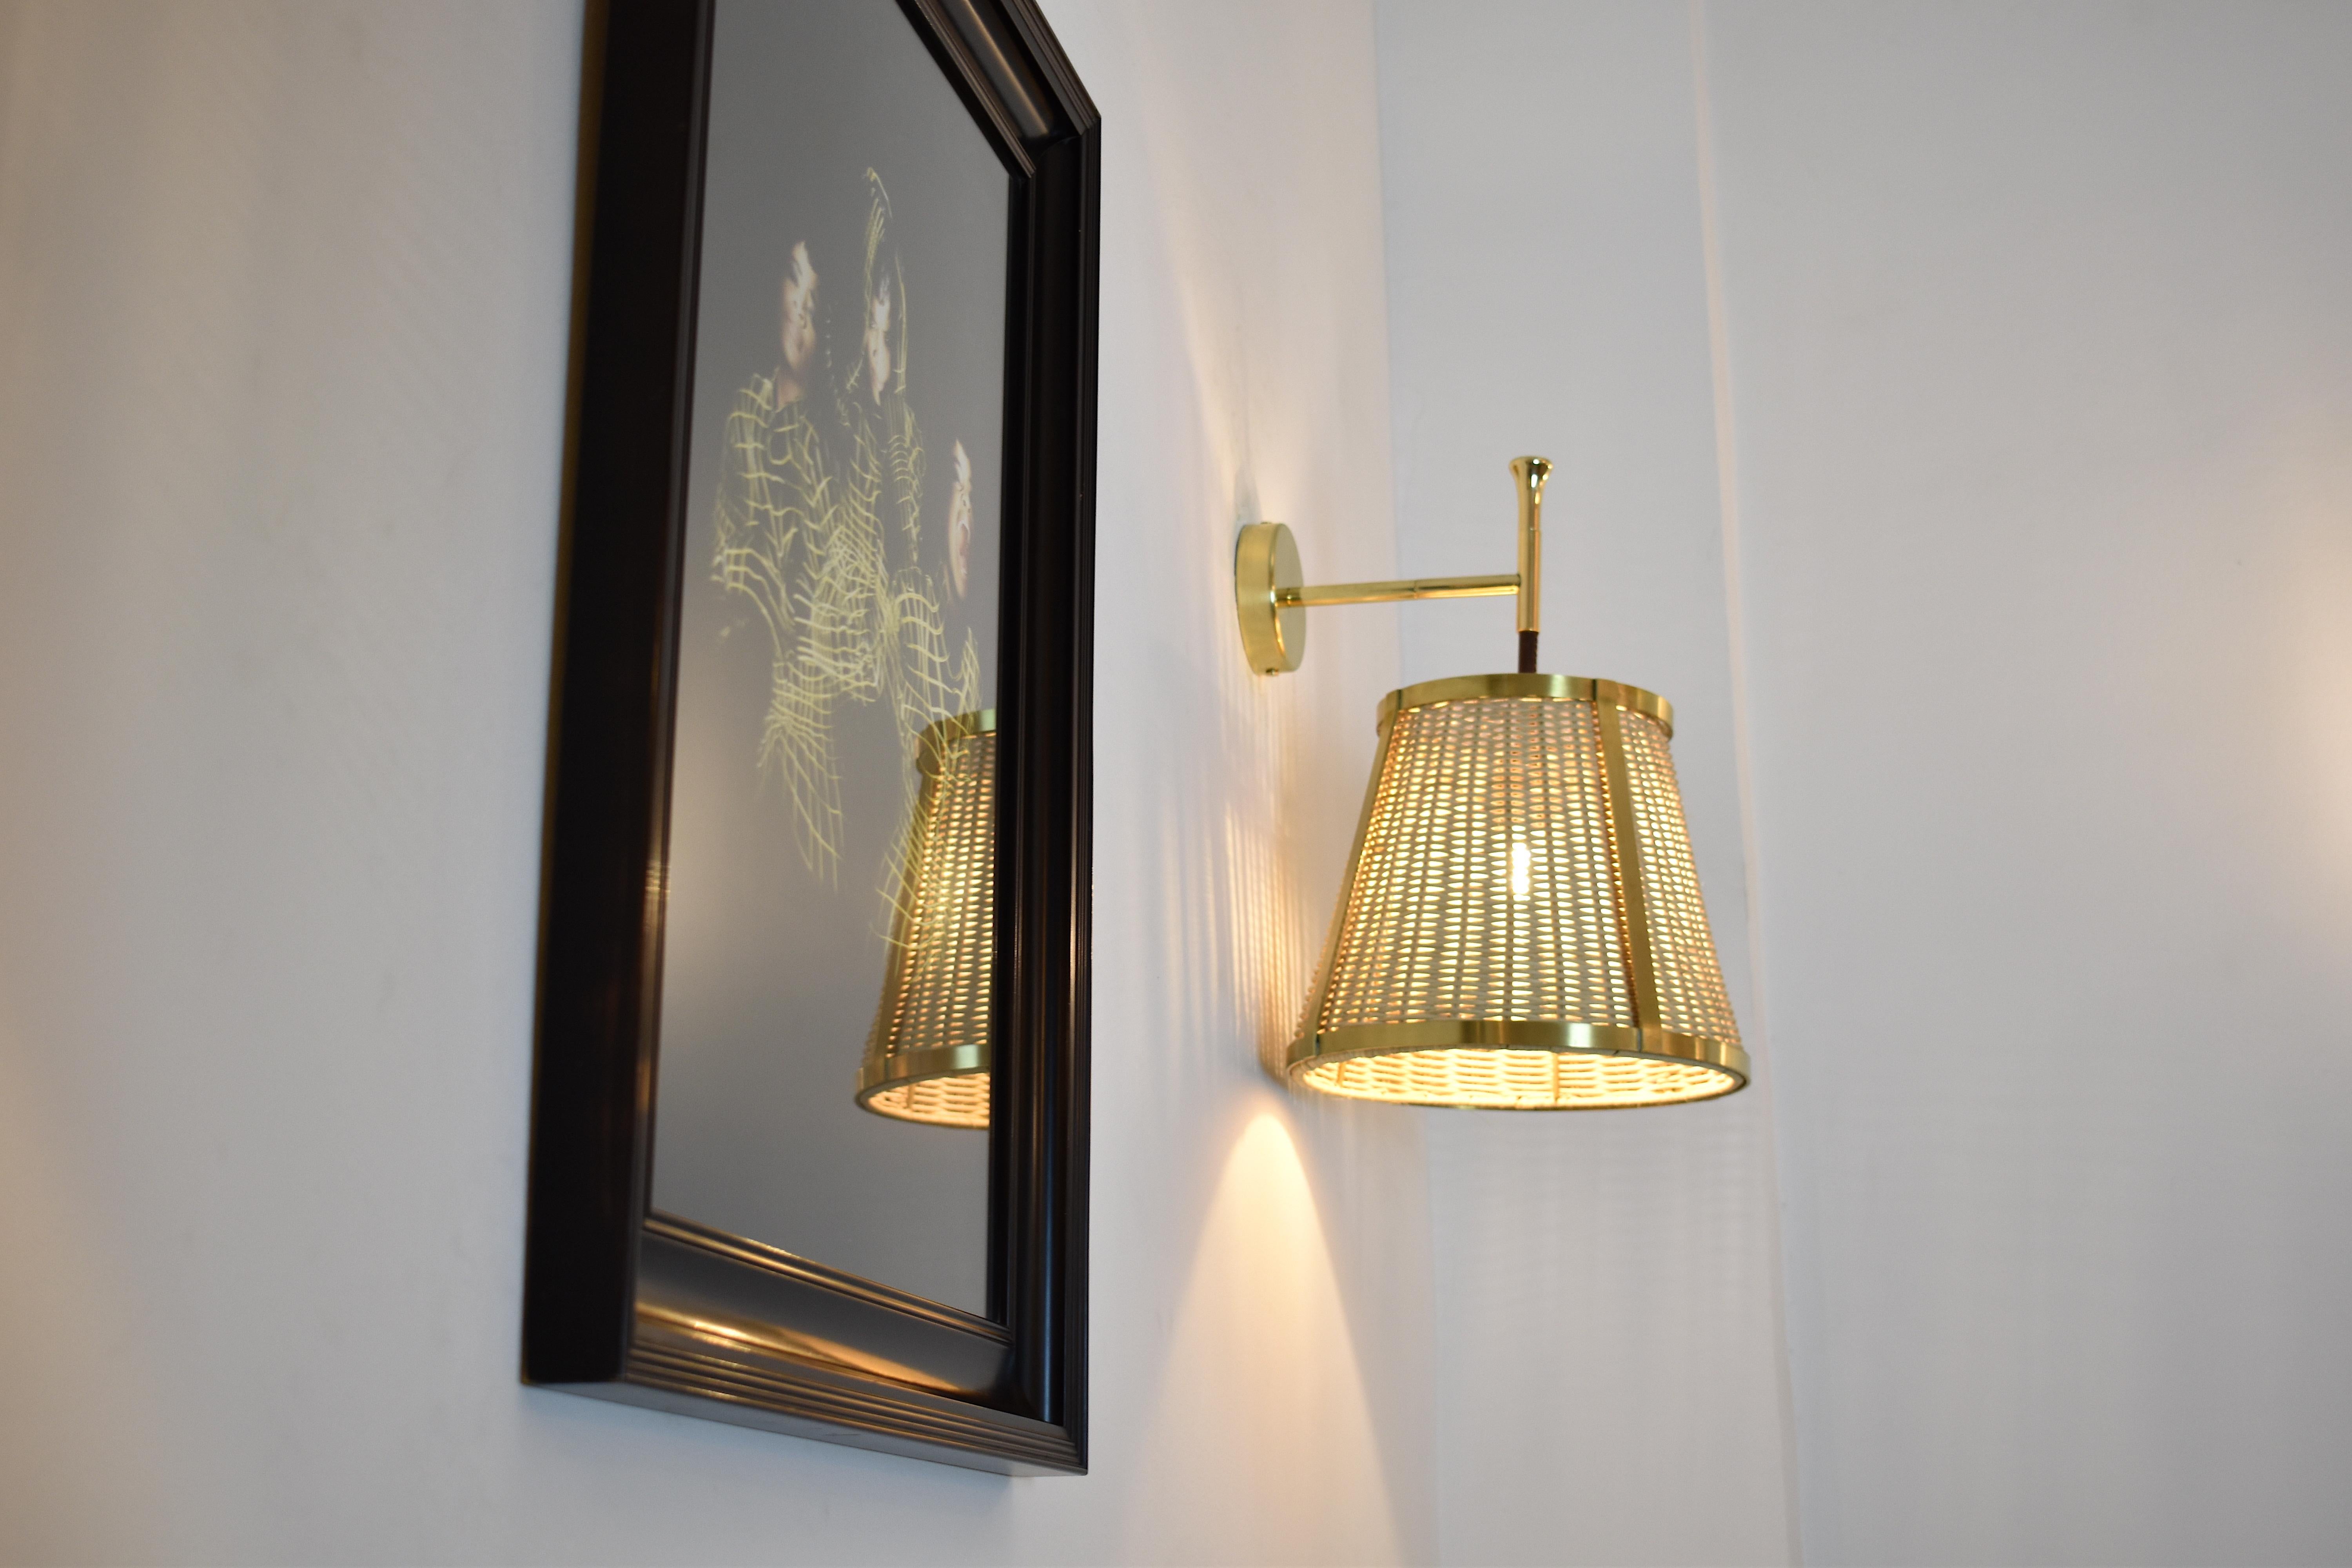 Caeli-W4 Brass and Rattan Sconce, Jas For Sale 1